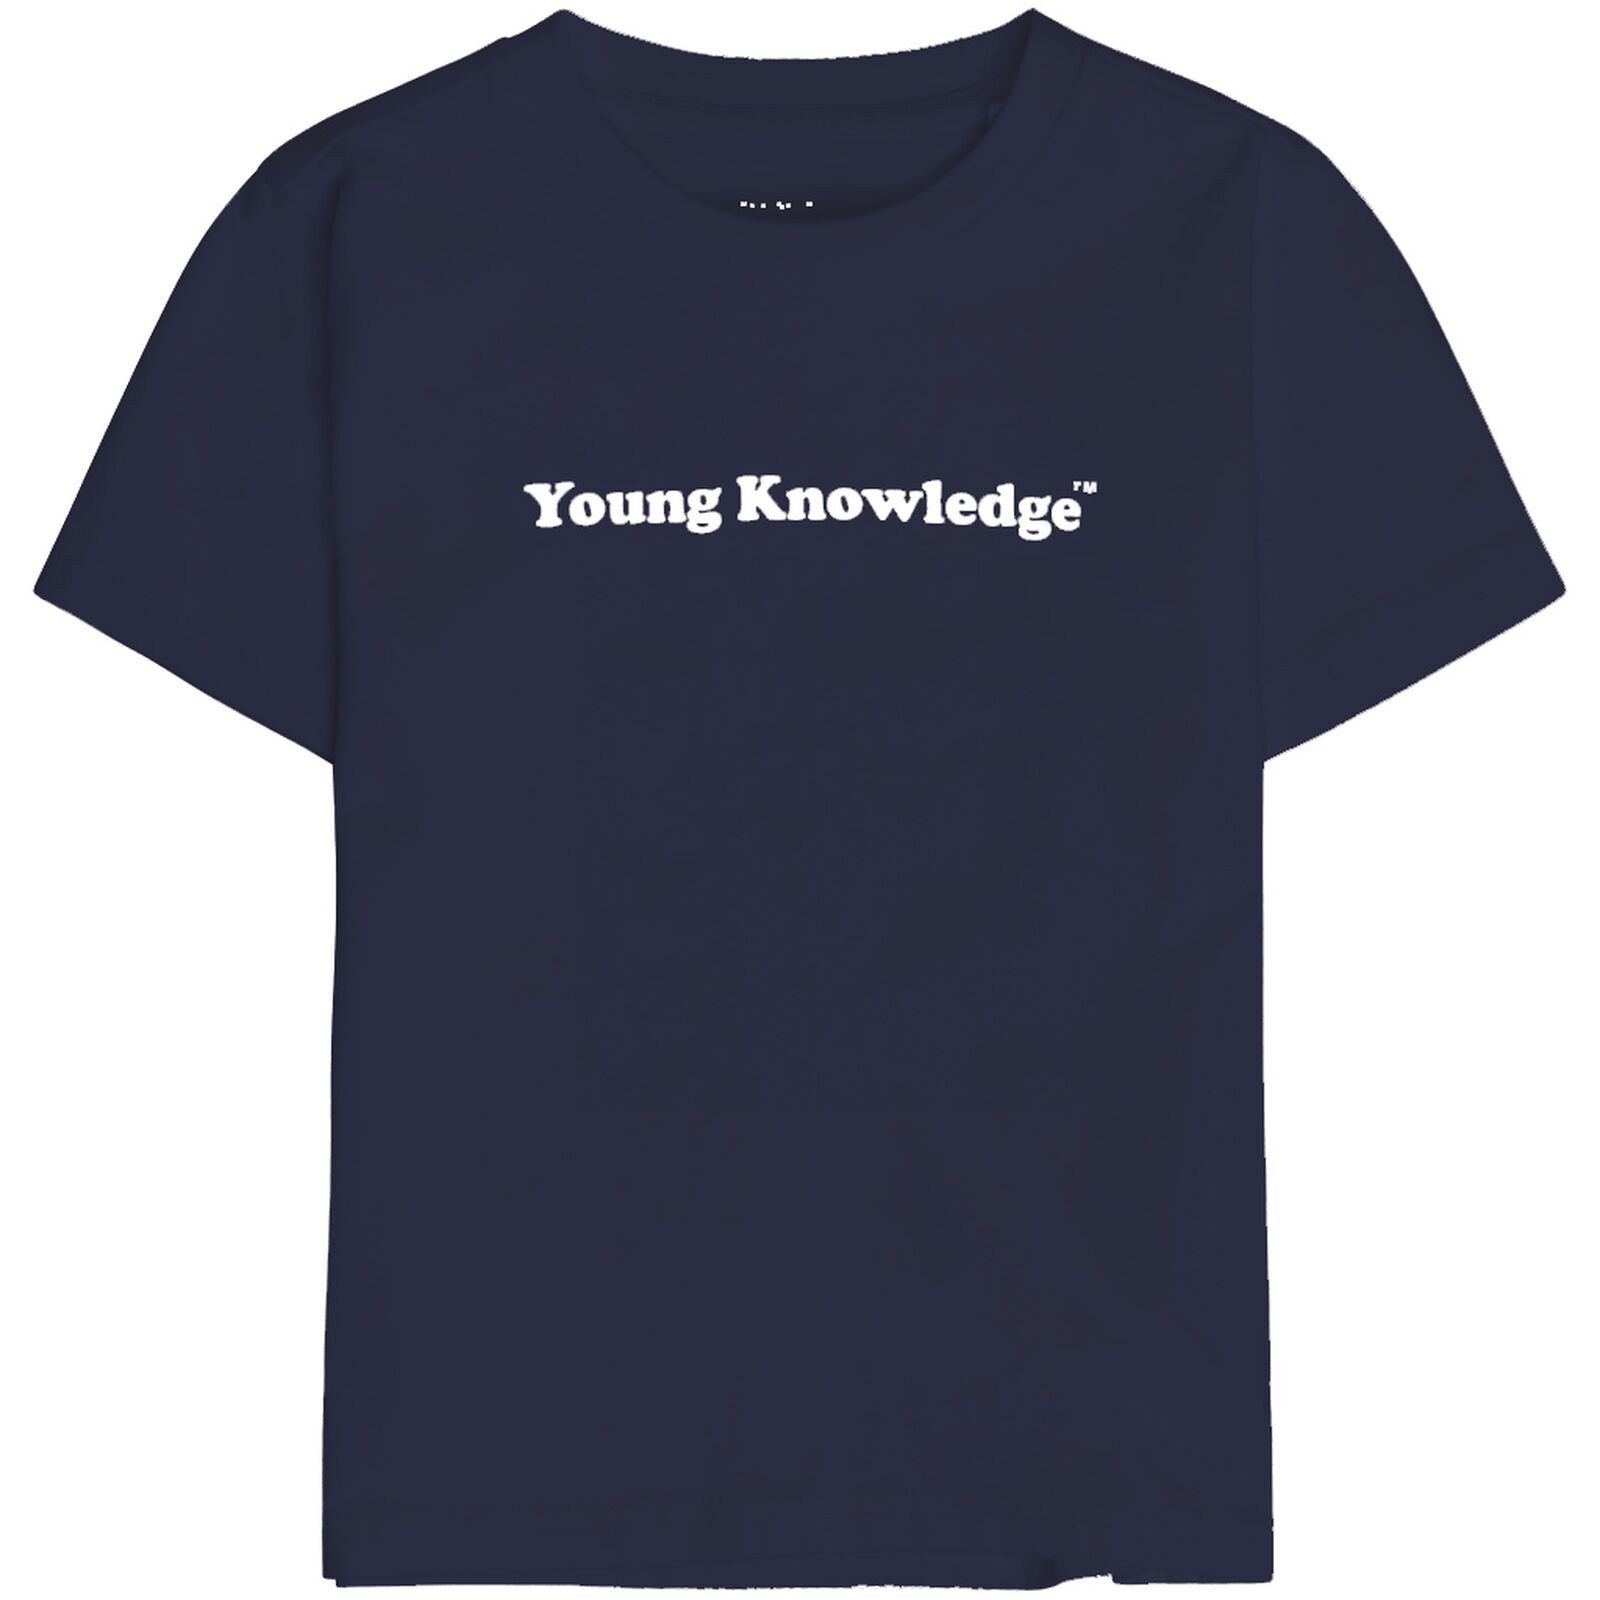 FLAX young knowledge tee Total Eclipse 98/104